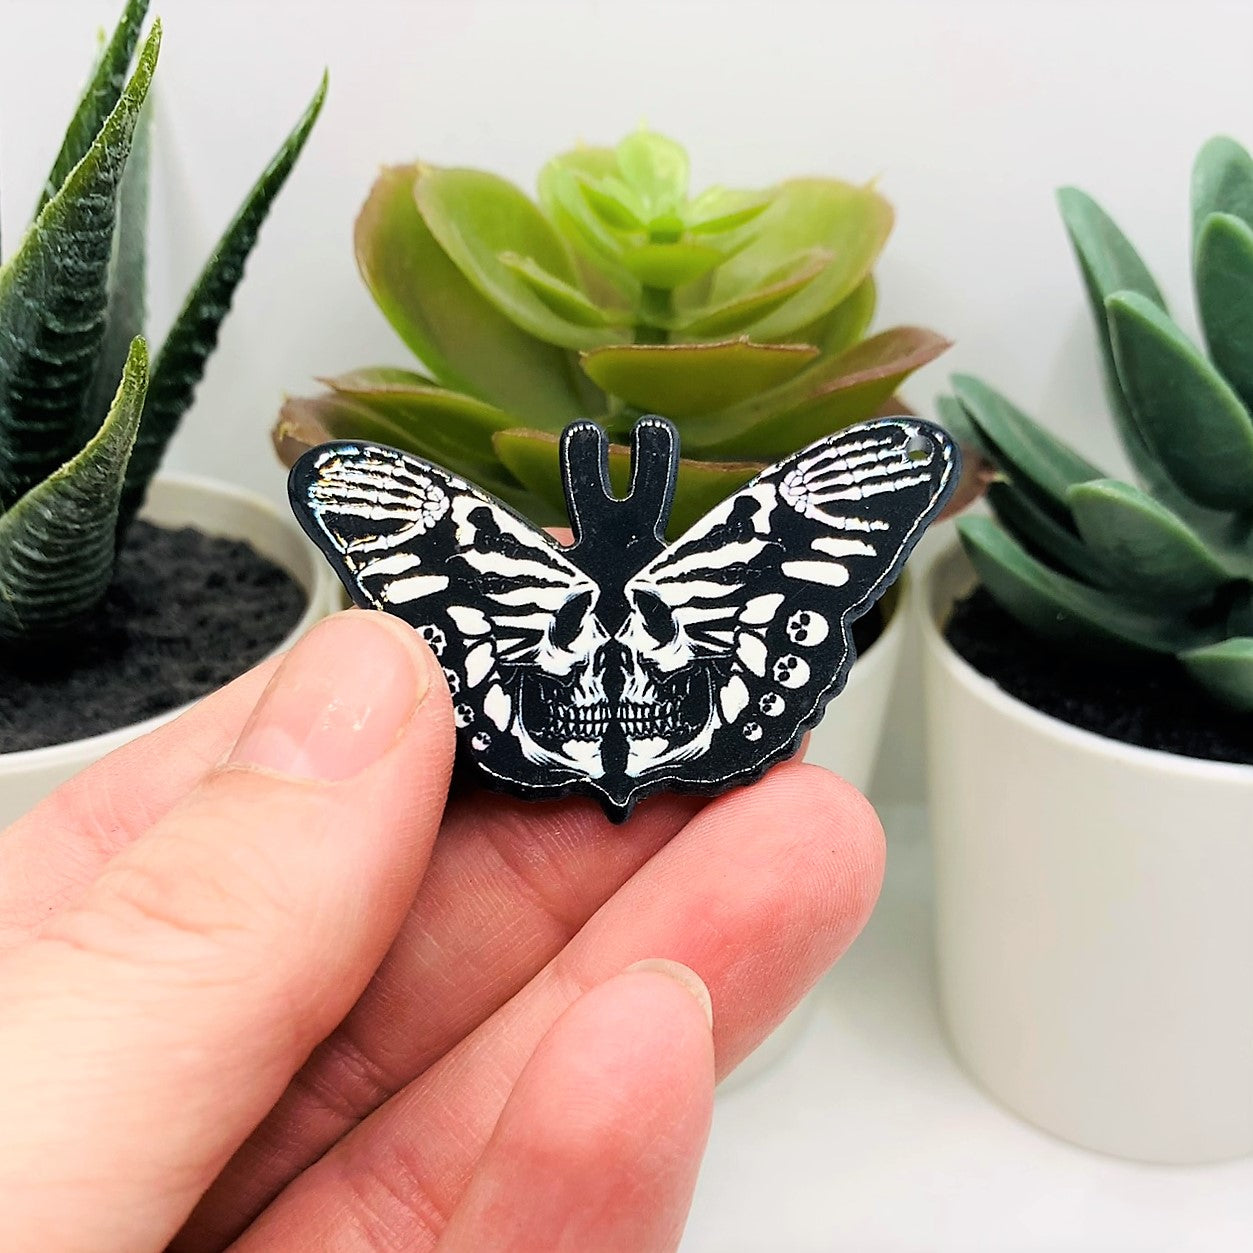 1, 4 or 20 Pieces: Black and White Moth with Bones - Double Sided!